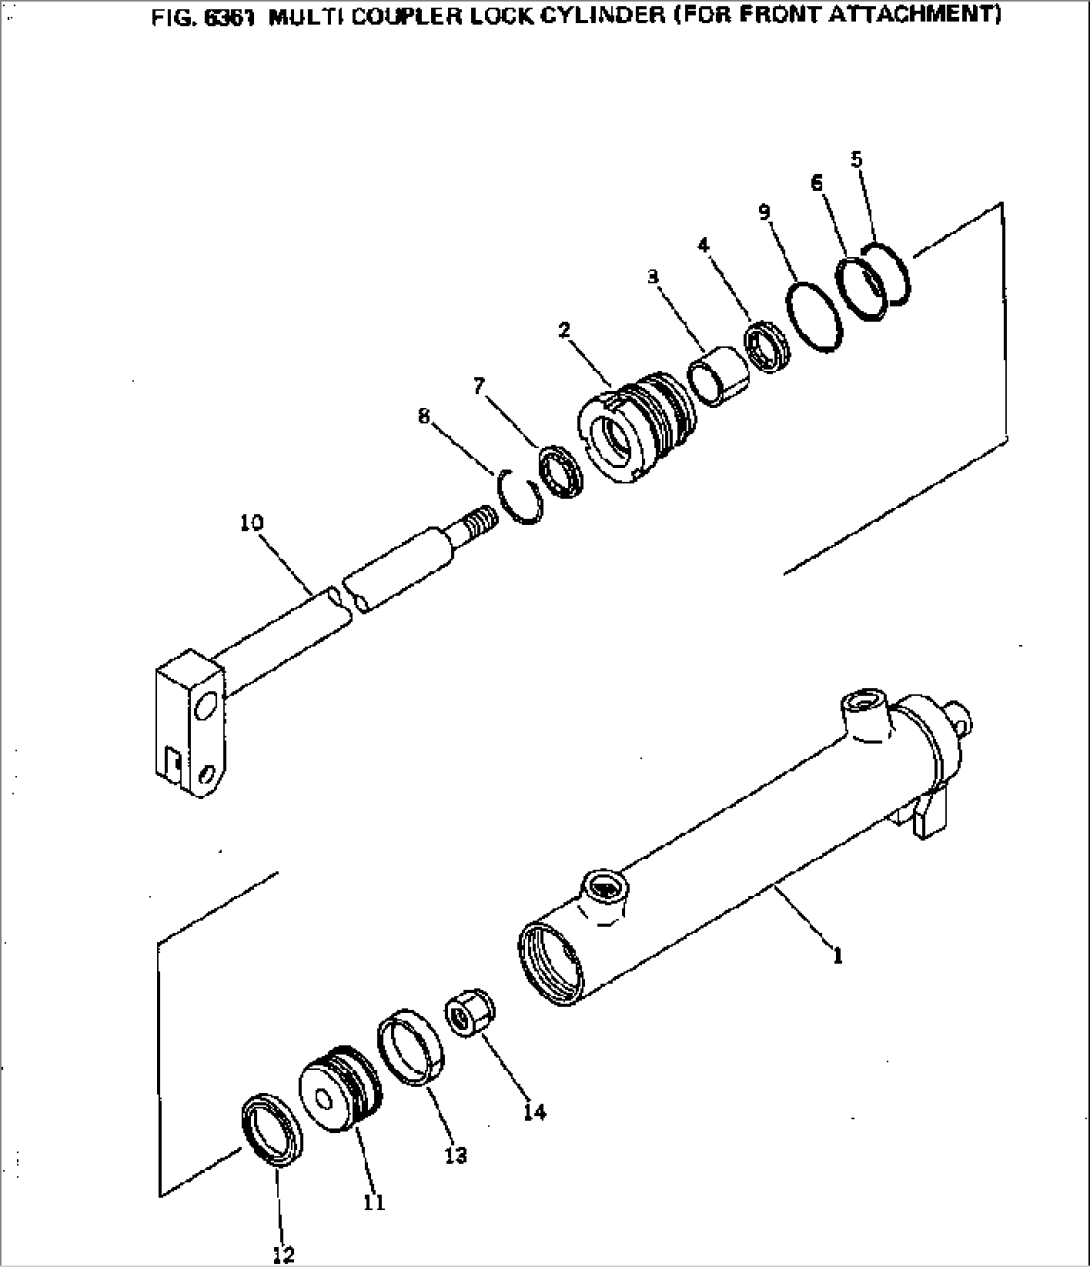 MULTI CUPLER LOCK CYLINDER (FOR FRONT ATTACHMENT)